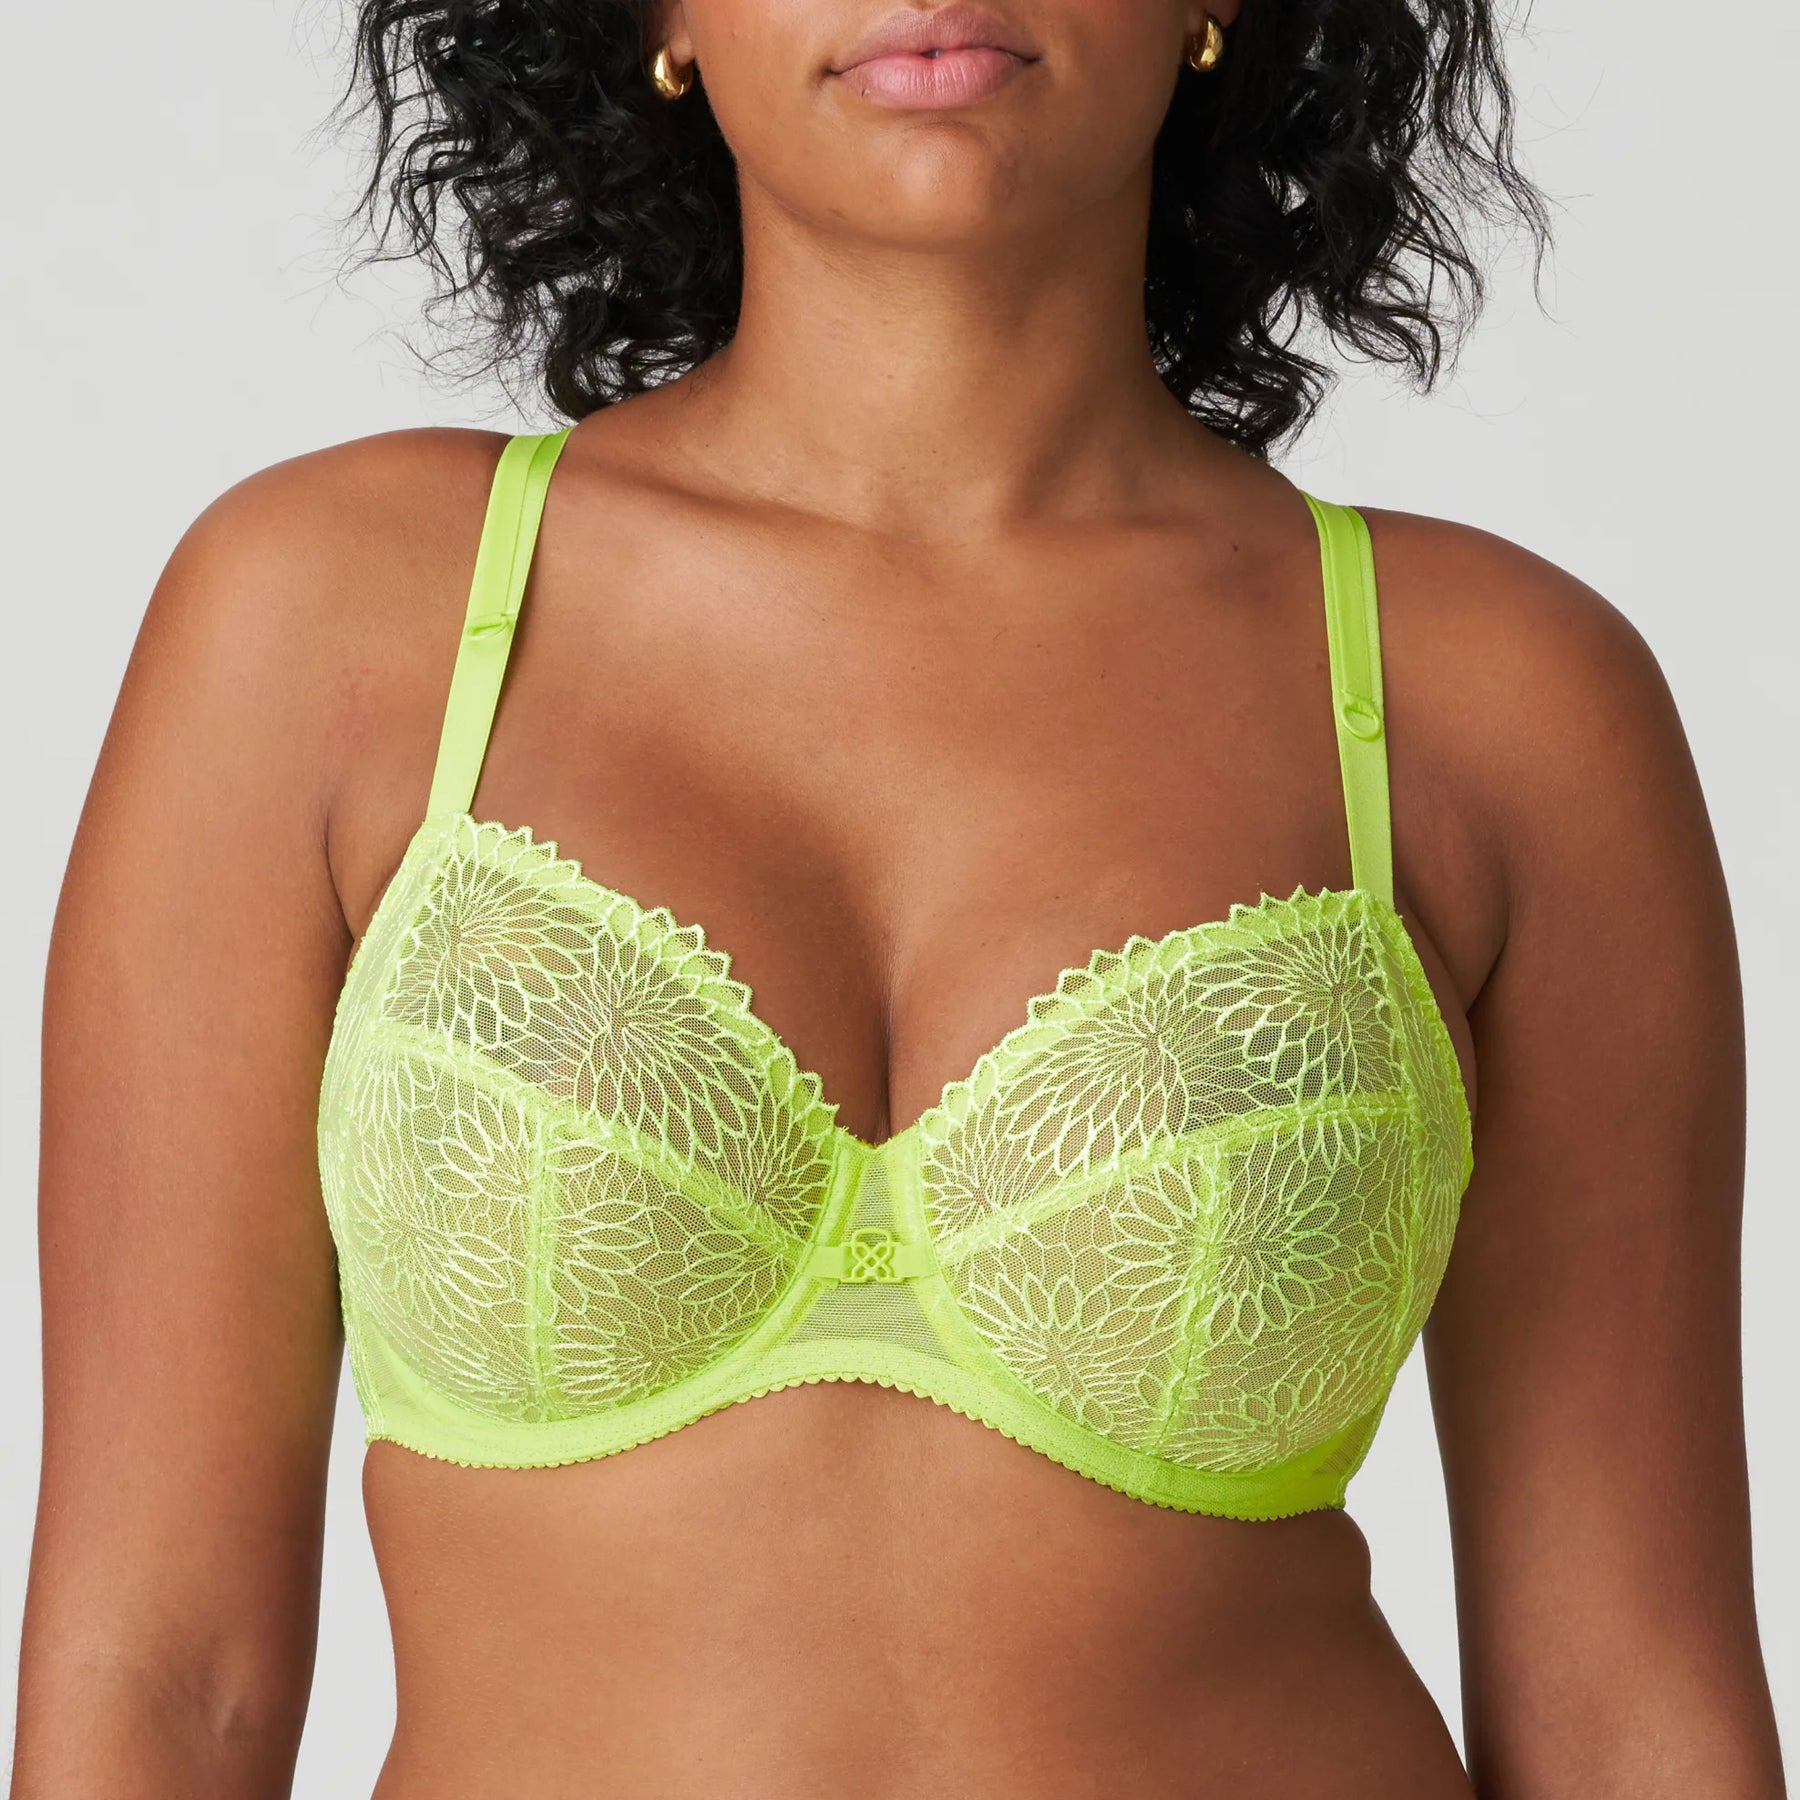 Datian 21001-4 Women's Yellow Non-padded Underwired Full Cup Bra